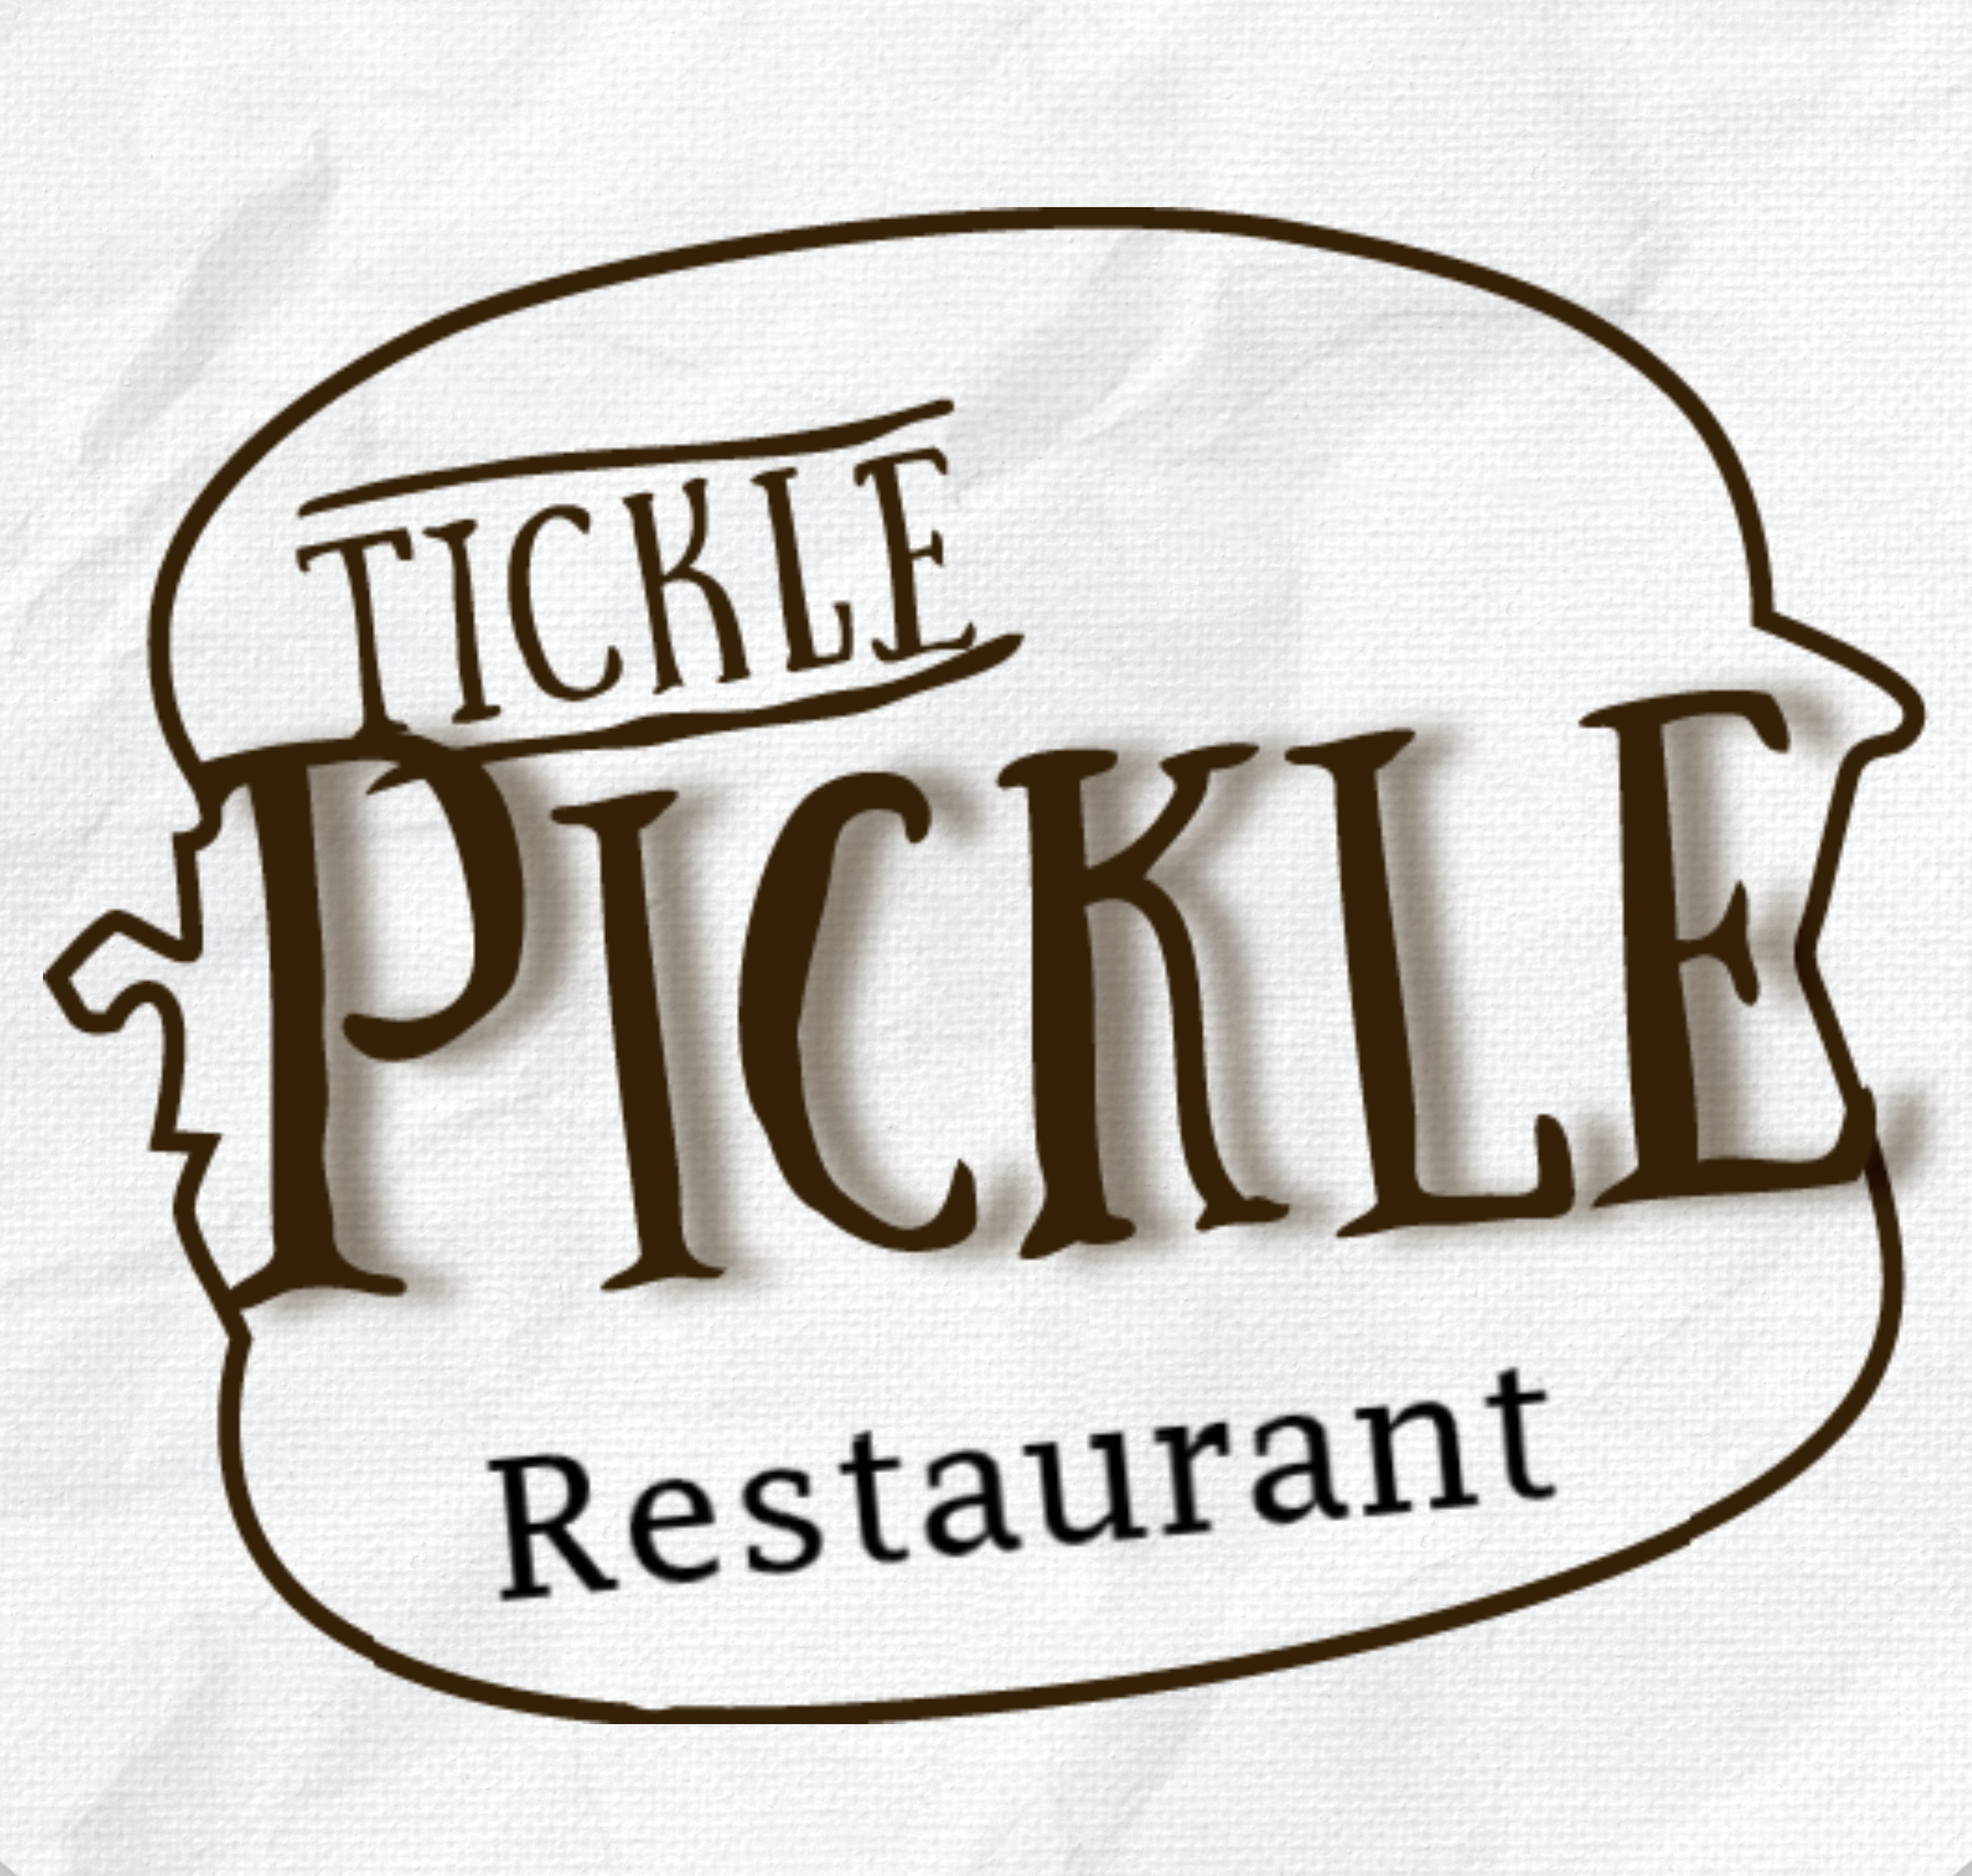 Pickle Gift card